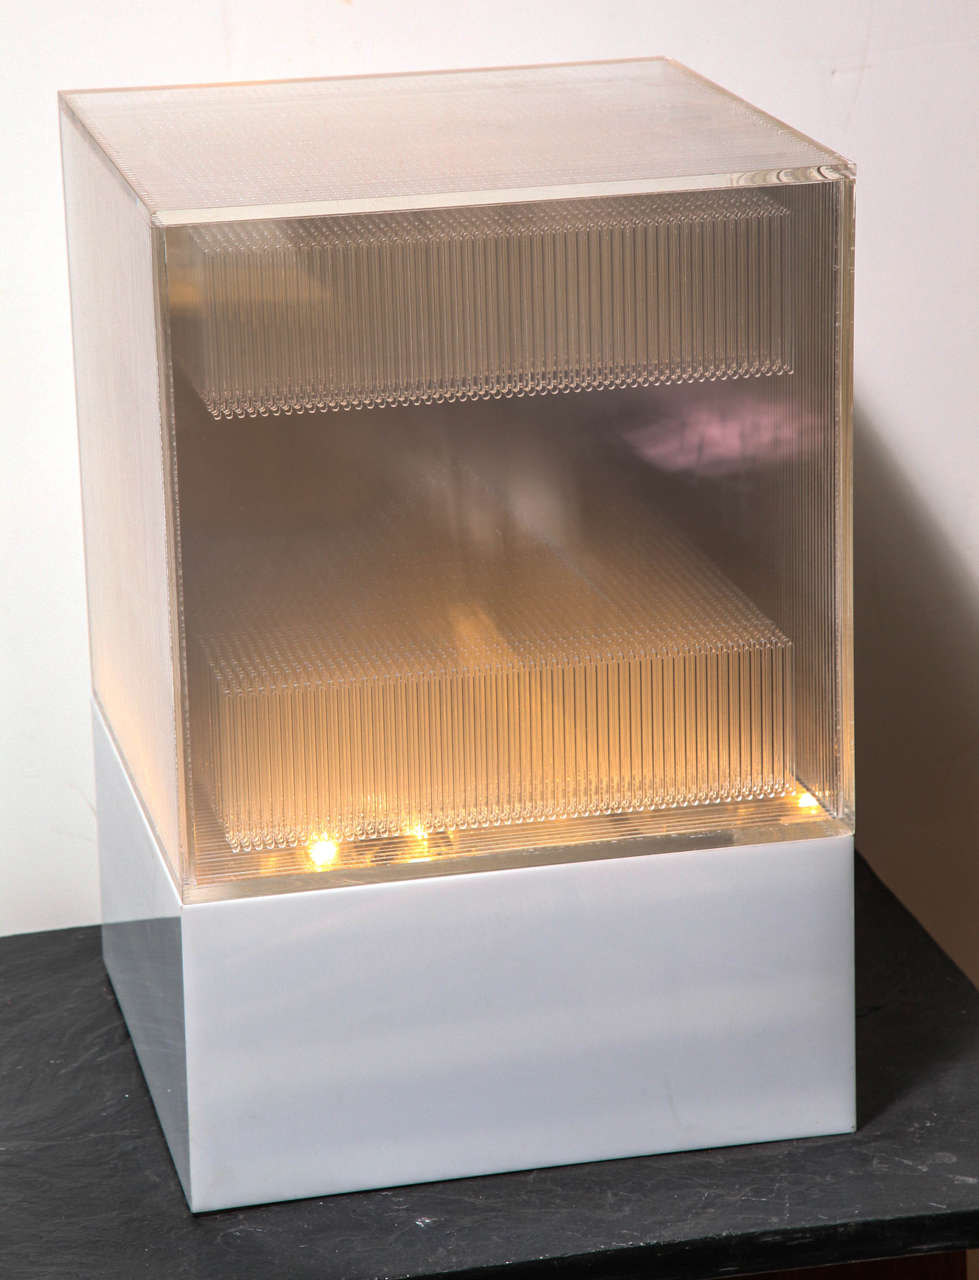 Neal Small Optical Art Table Top Light Sculpture. Featuring a squared White Lucite base, clear rectangular top with enclosed transparent Lucite panel pyramid design. Dynamic with or without illumination. Handcrafted. Architectural. Sculptural.